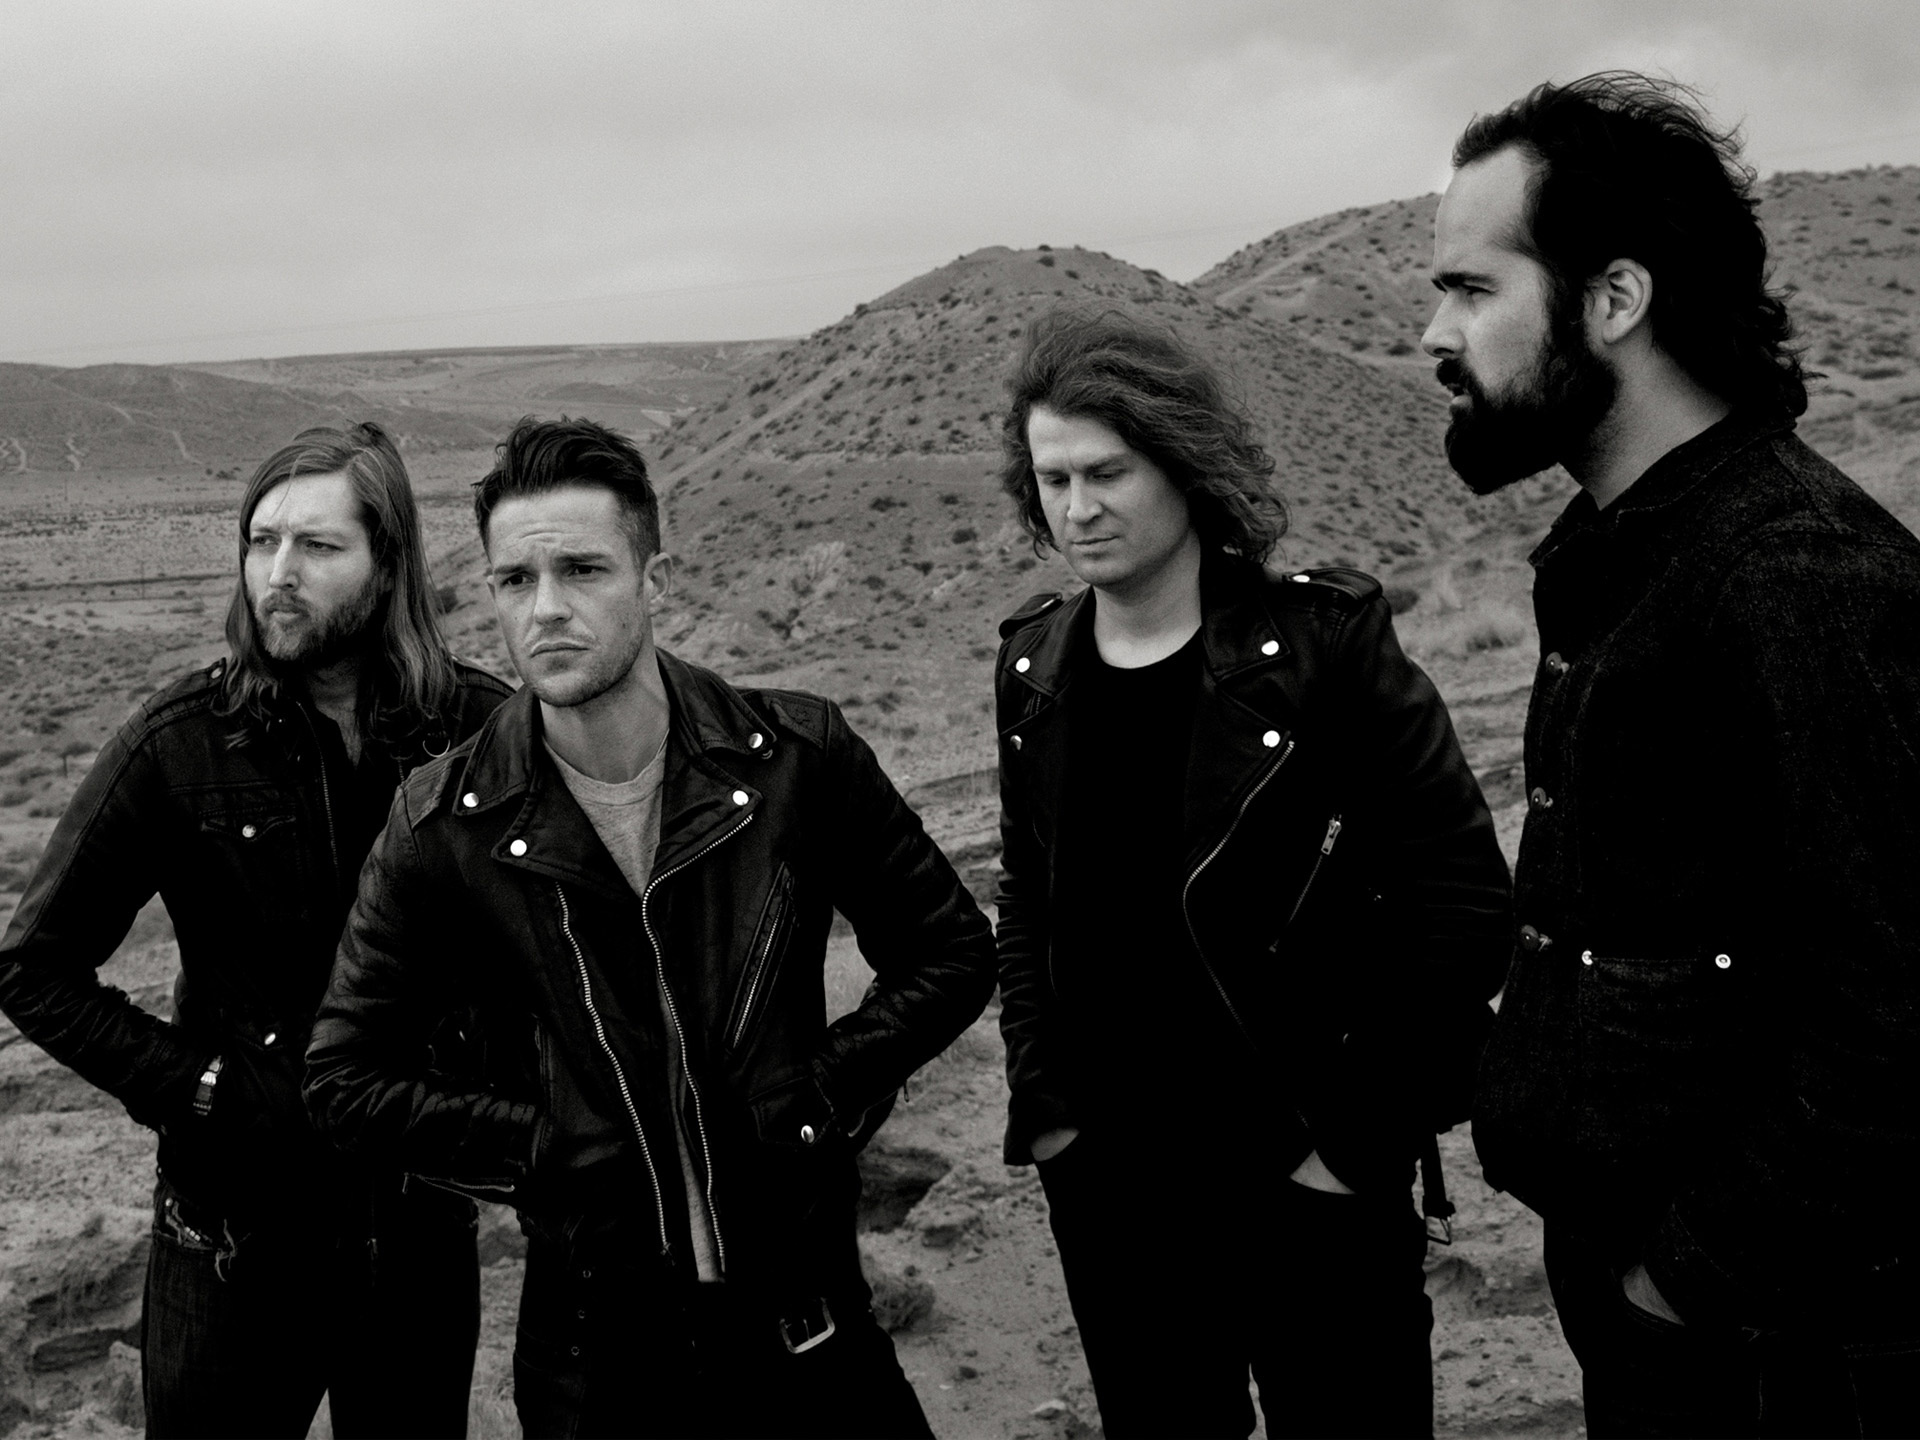 The Killers band, HD wallpapers, Music and art, 1920x1440 HD Desktop